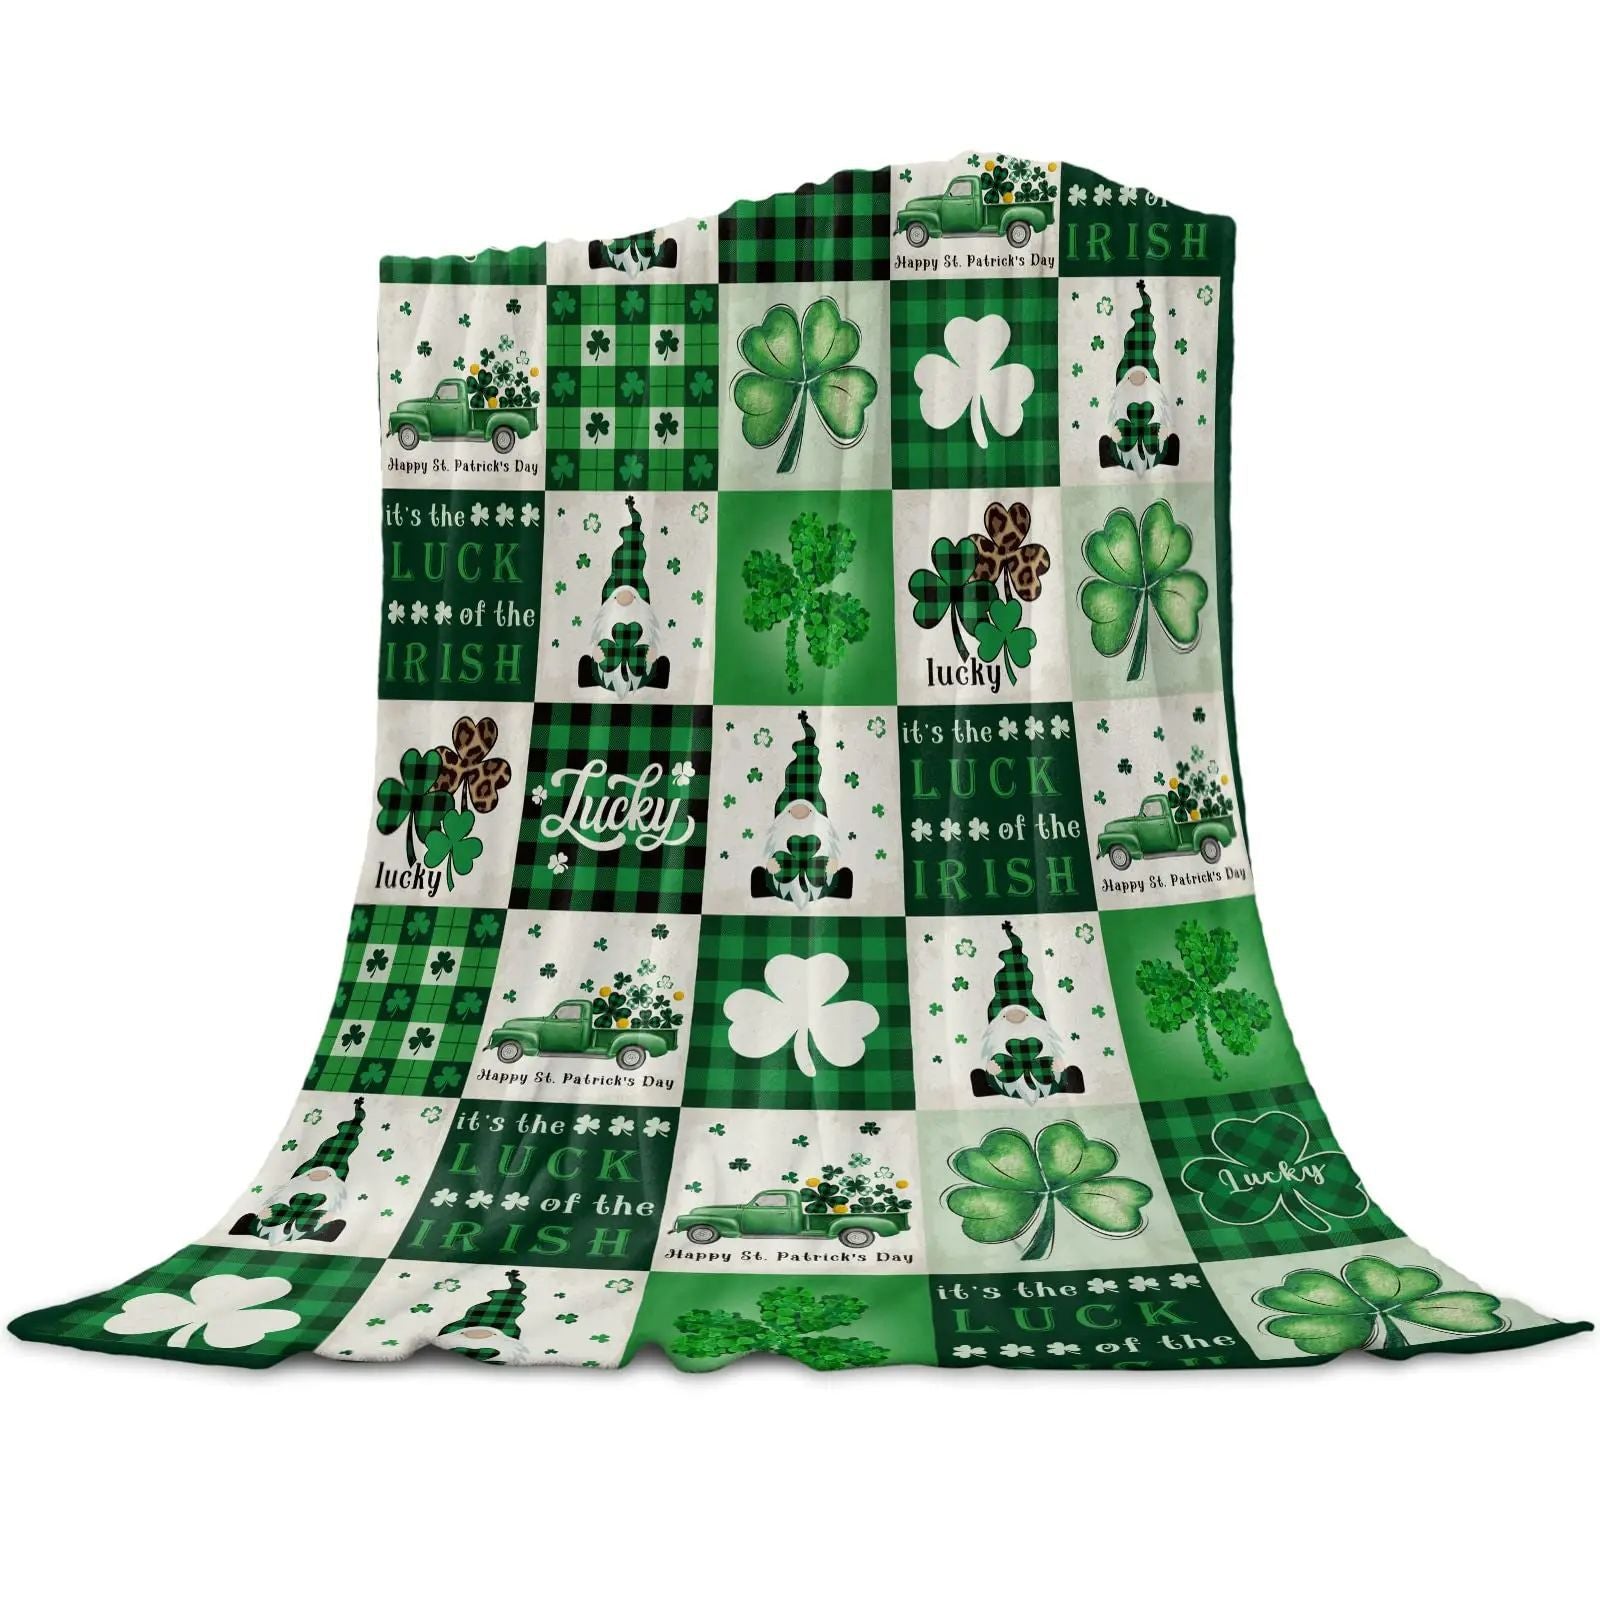 Blanket Clover Design Flannel Blanket Sofa Decorative Blanket Bed Sheet Bedspreads, Green-themed party supplies, Irish Festival Decoration Items, St Patricks Day Decoration Items, Decognomes,